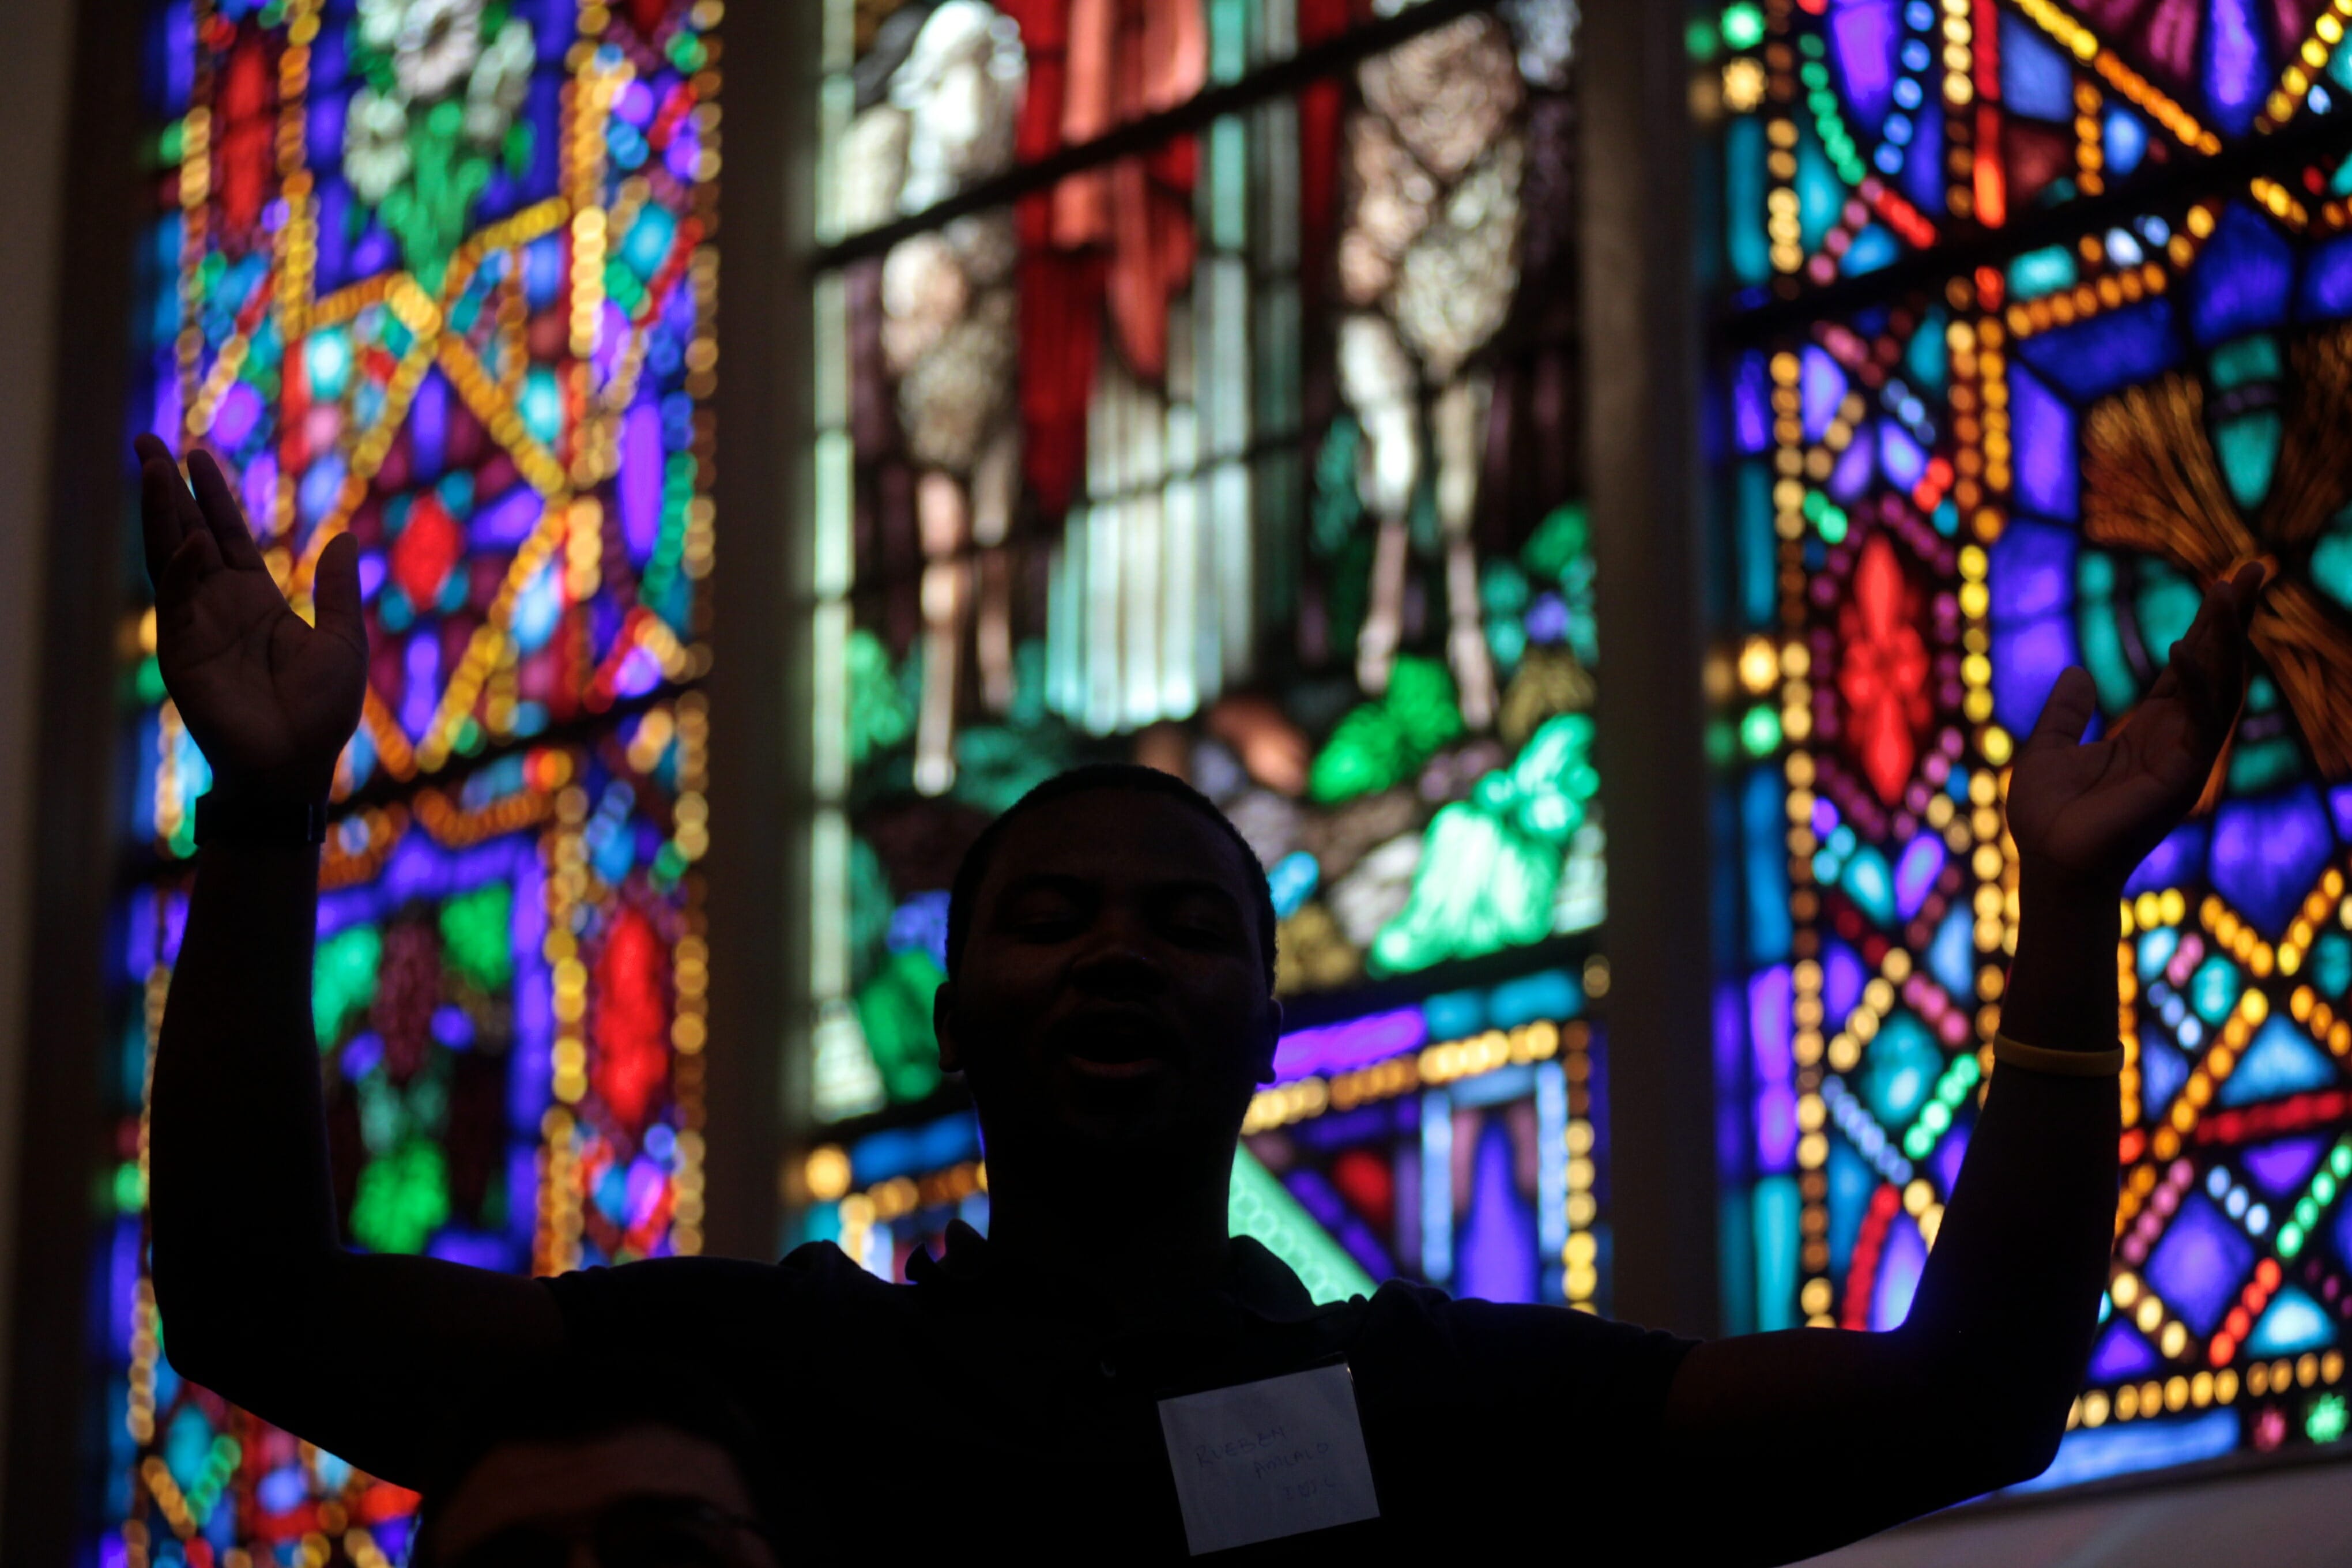 The Three Phases of Rare Racial Reconciliation in Churches: From Cordial to Messy to Real